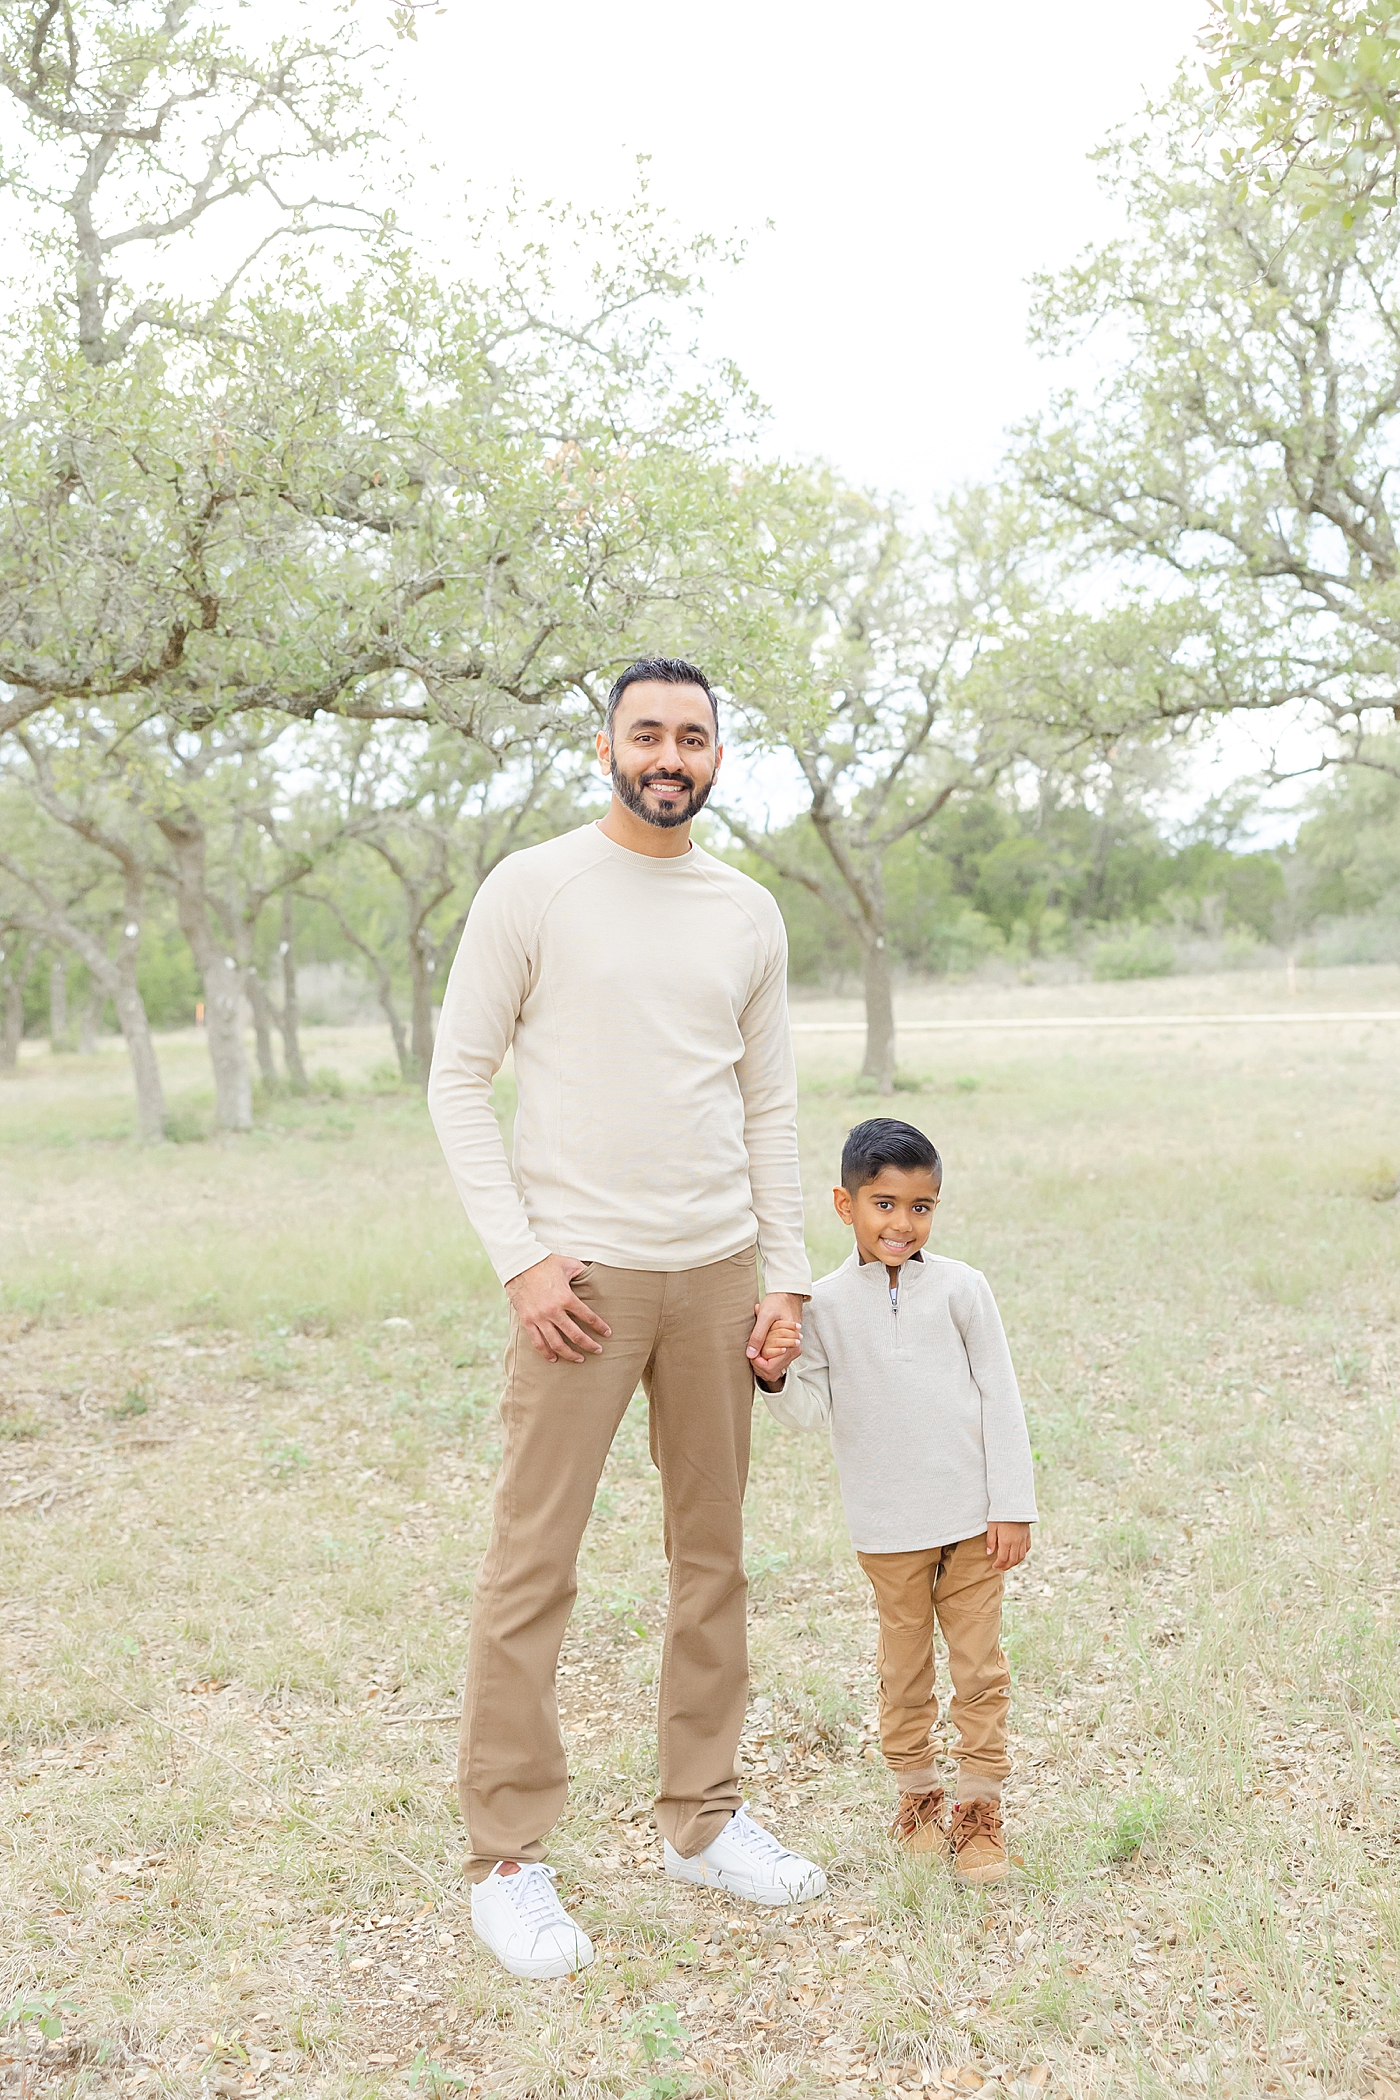 Dad with his son in the park | Image by Sana Ahmed Photography